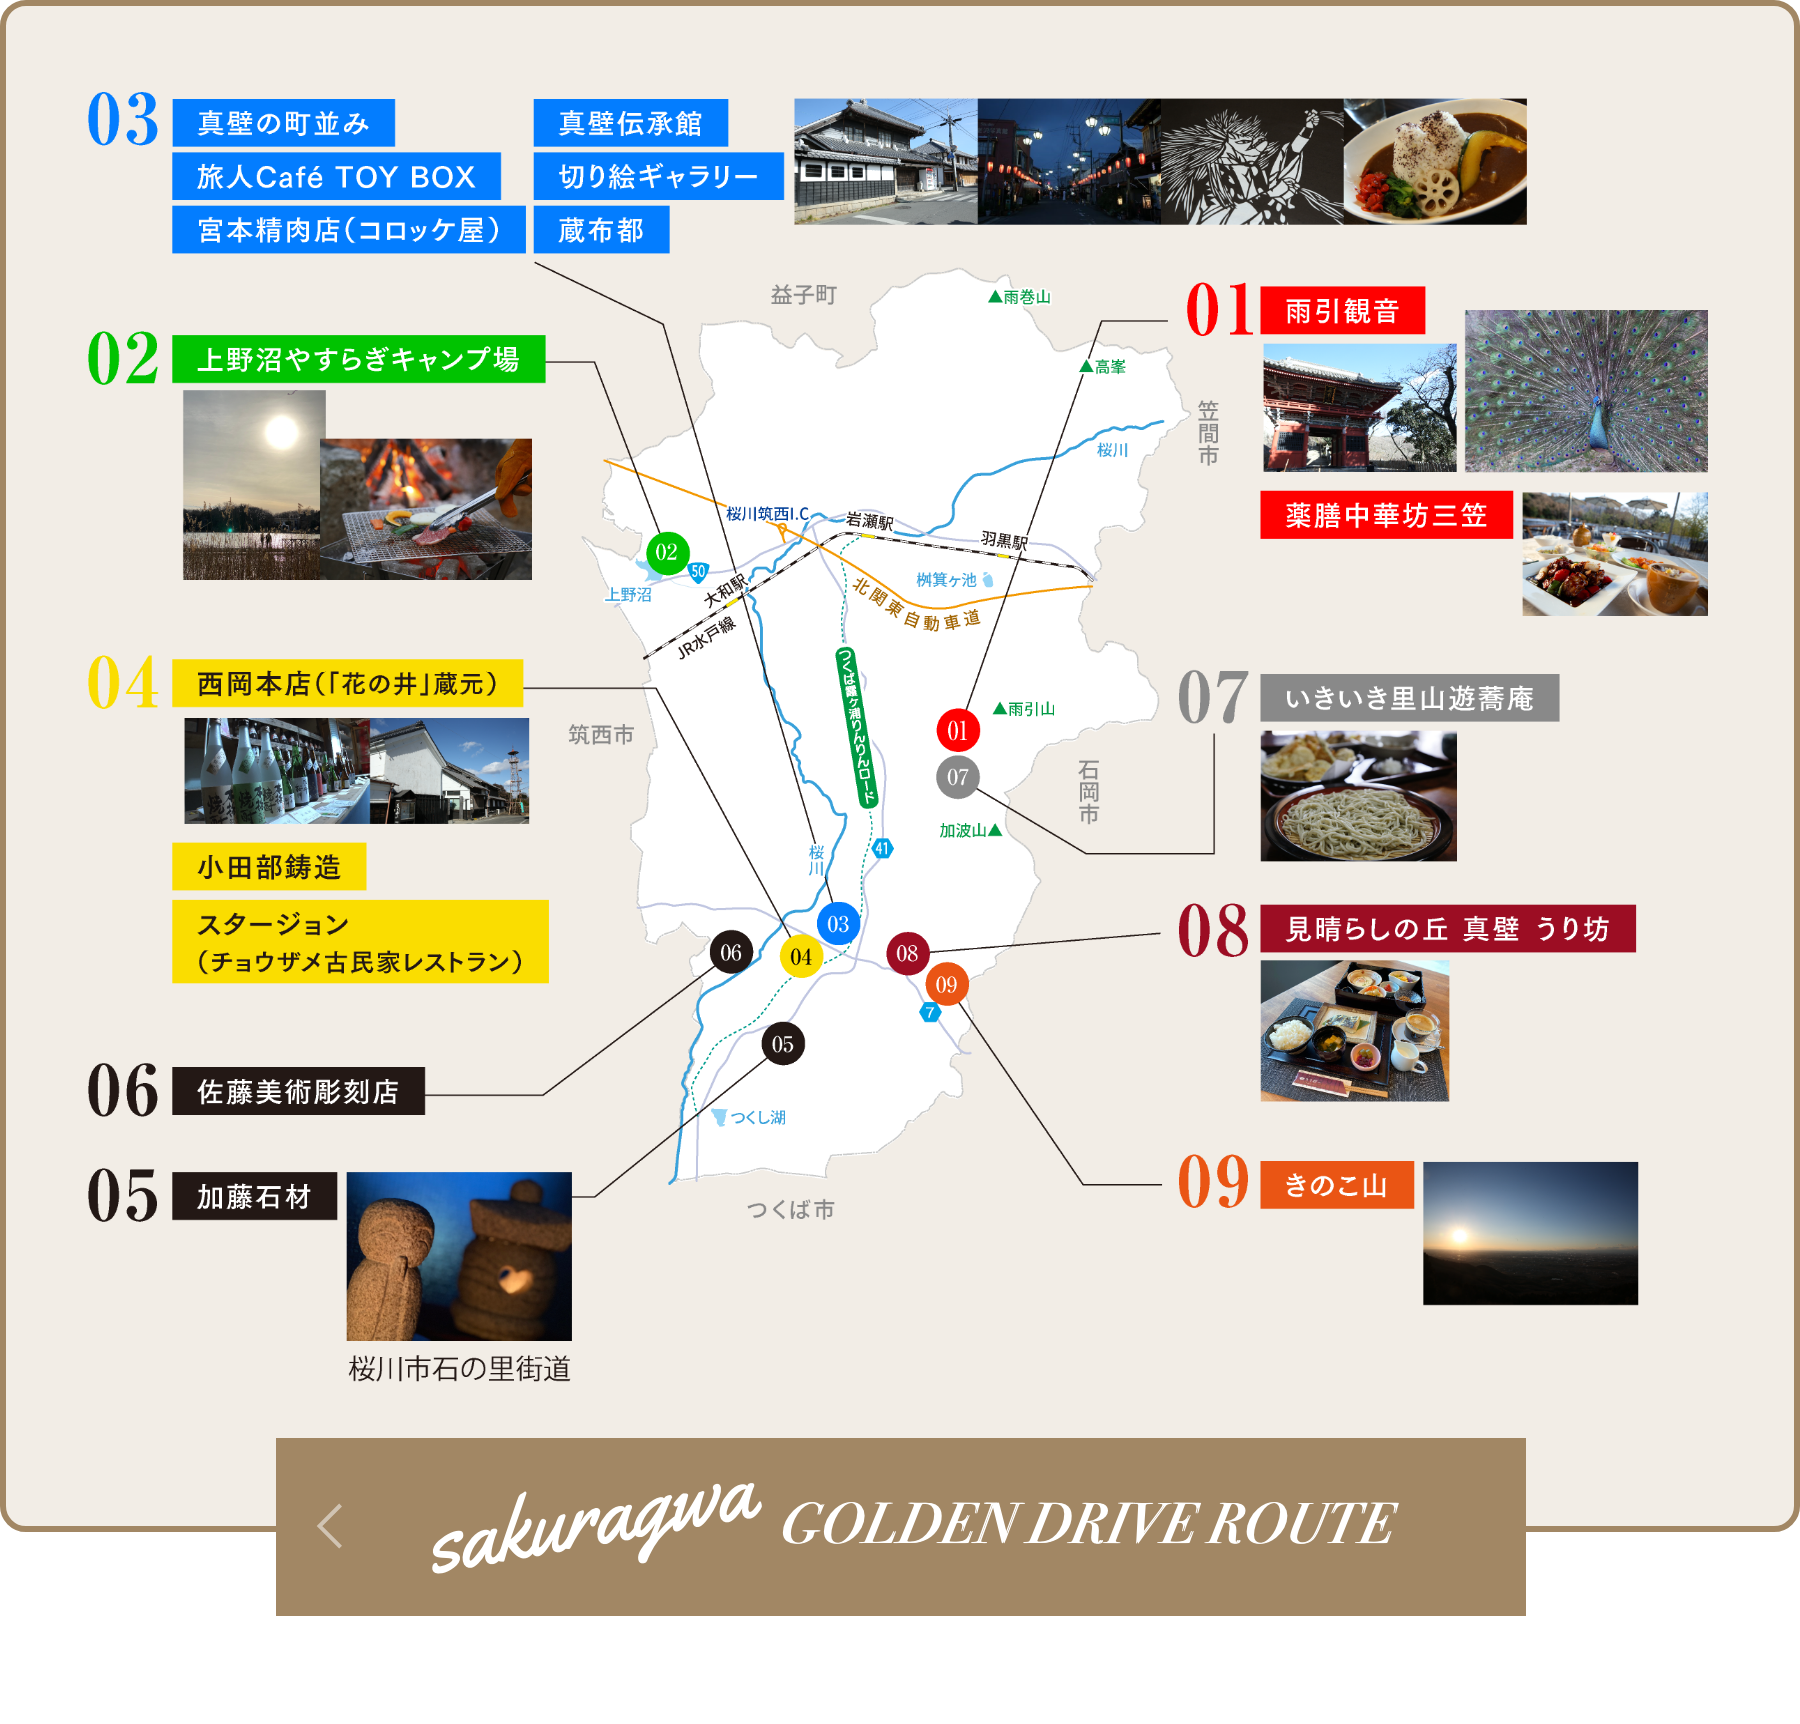 Back to Golden Drive Route